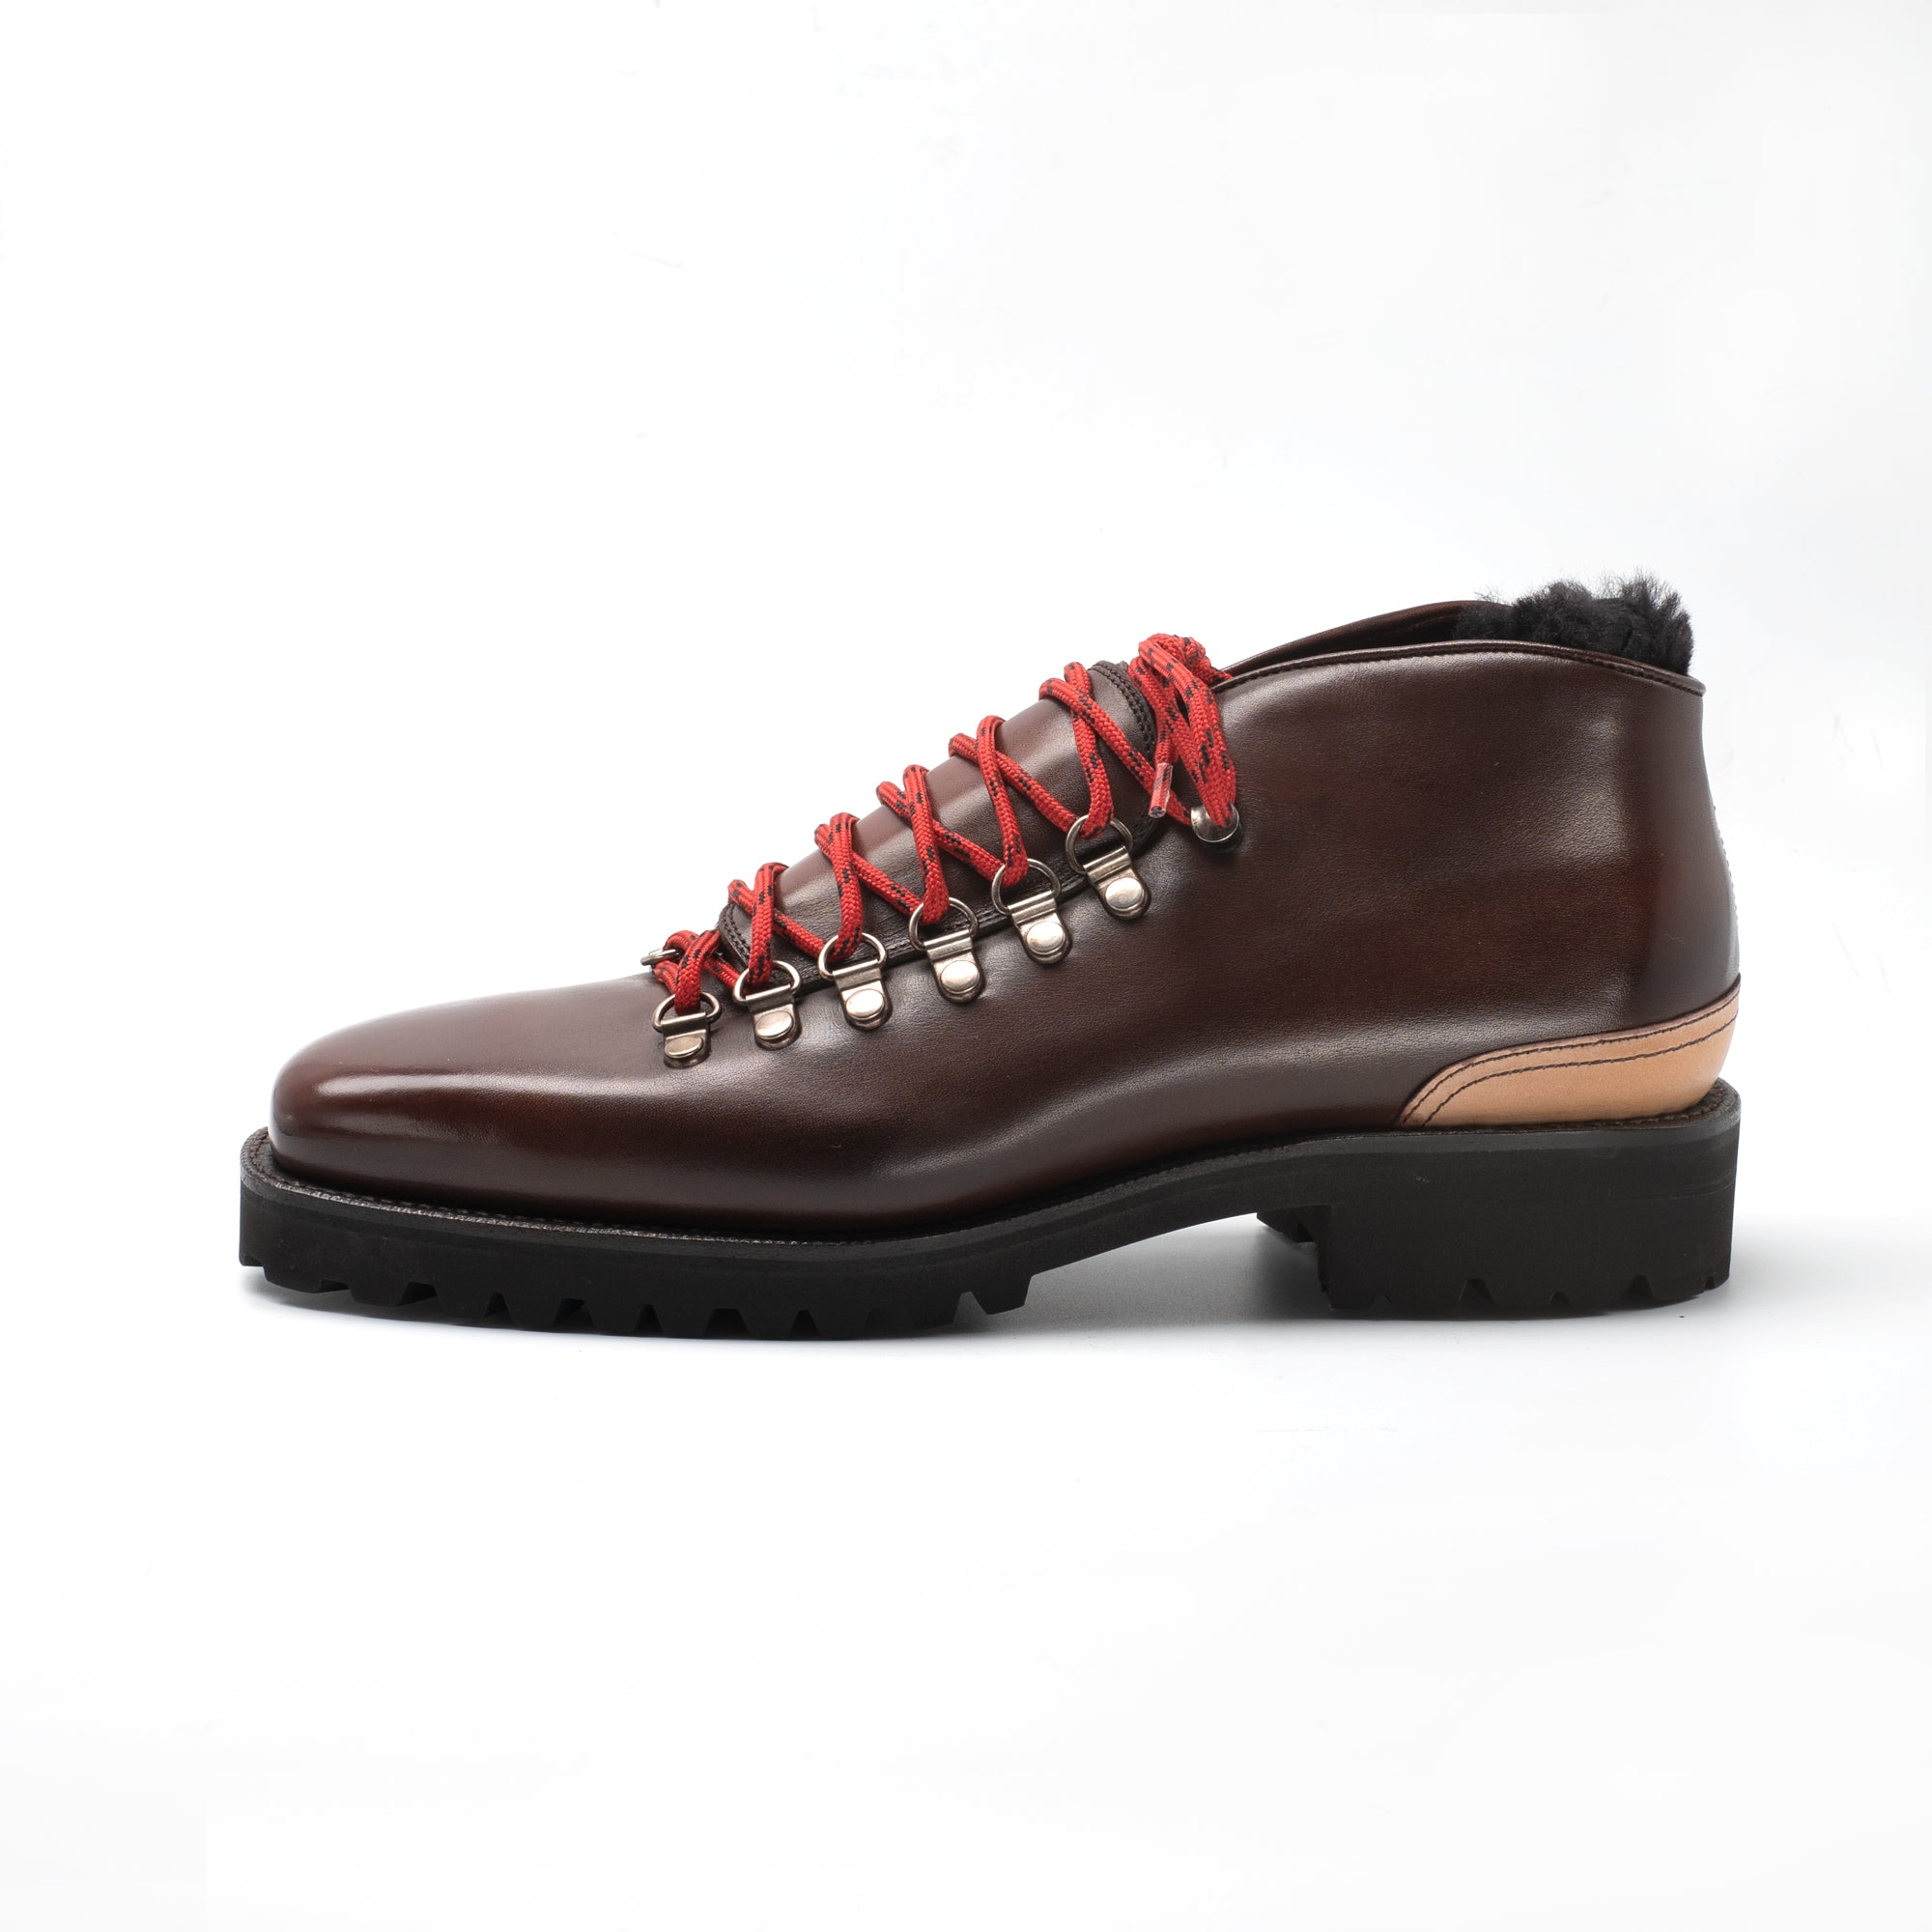 Borcego Mountain Boot by Norman Vilalta Men’s Goodyear-welted Boots in Barcelona, Spain